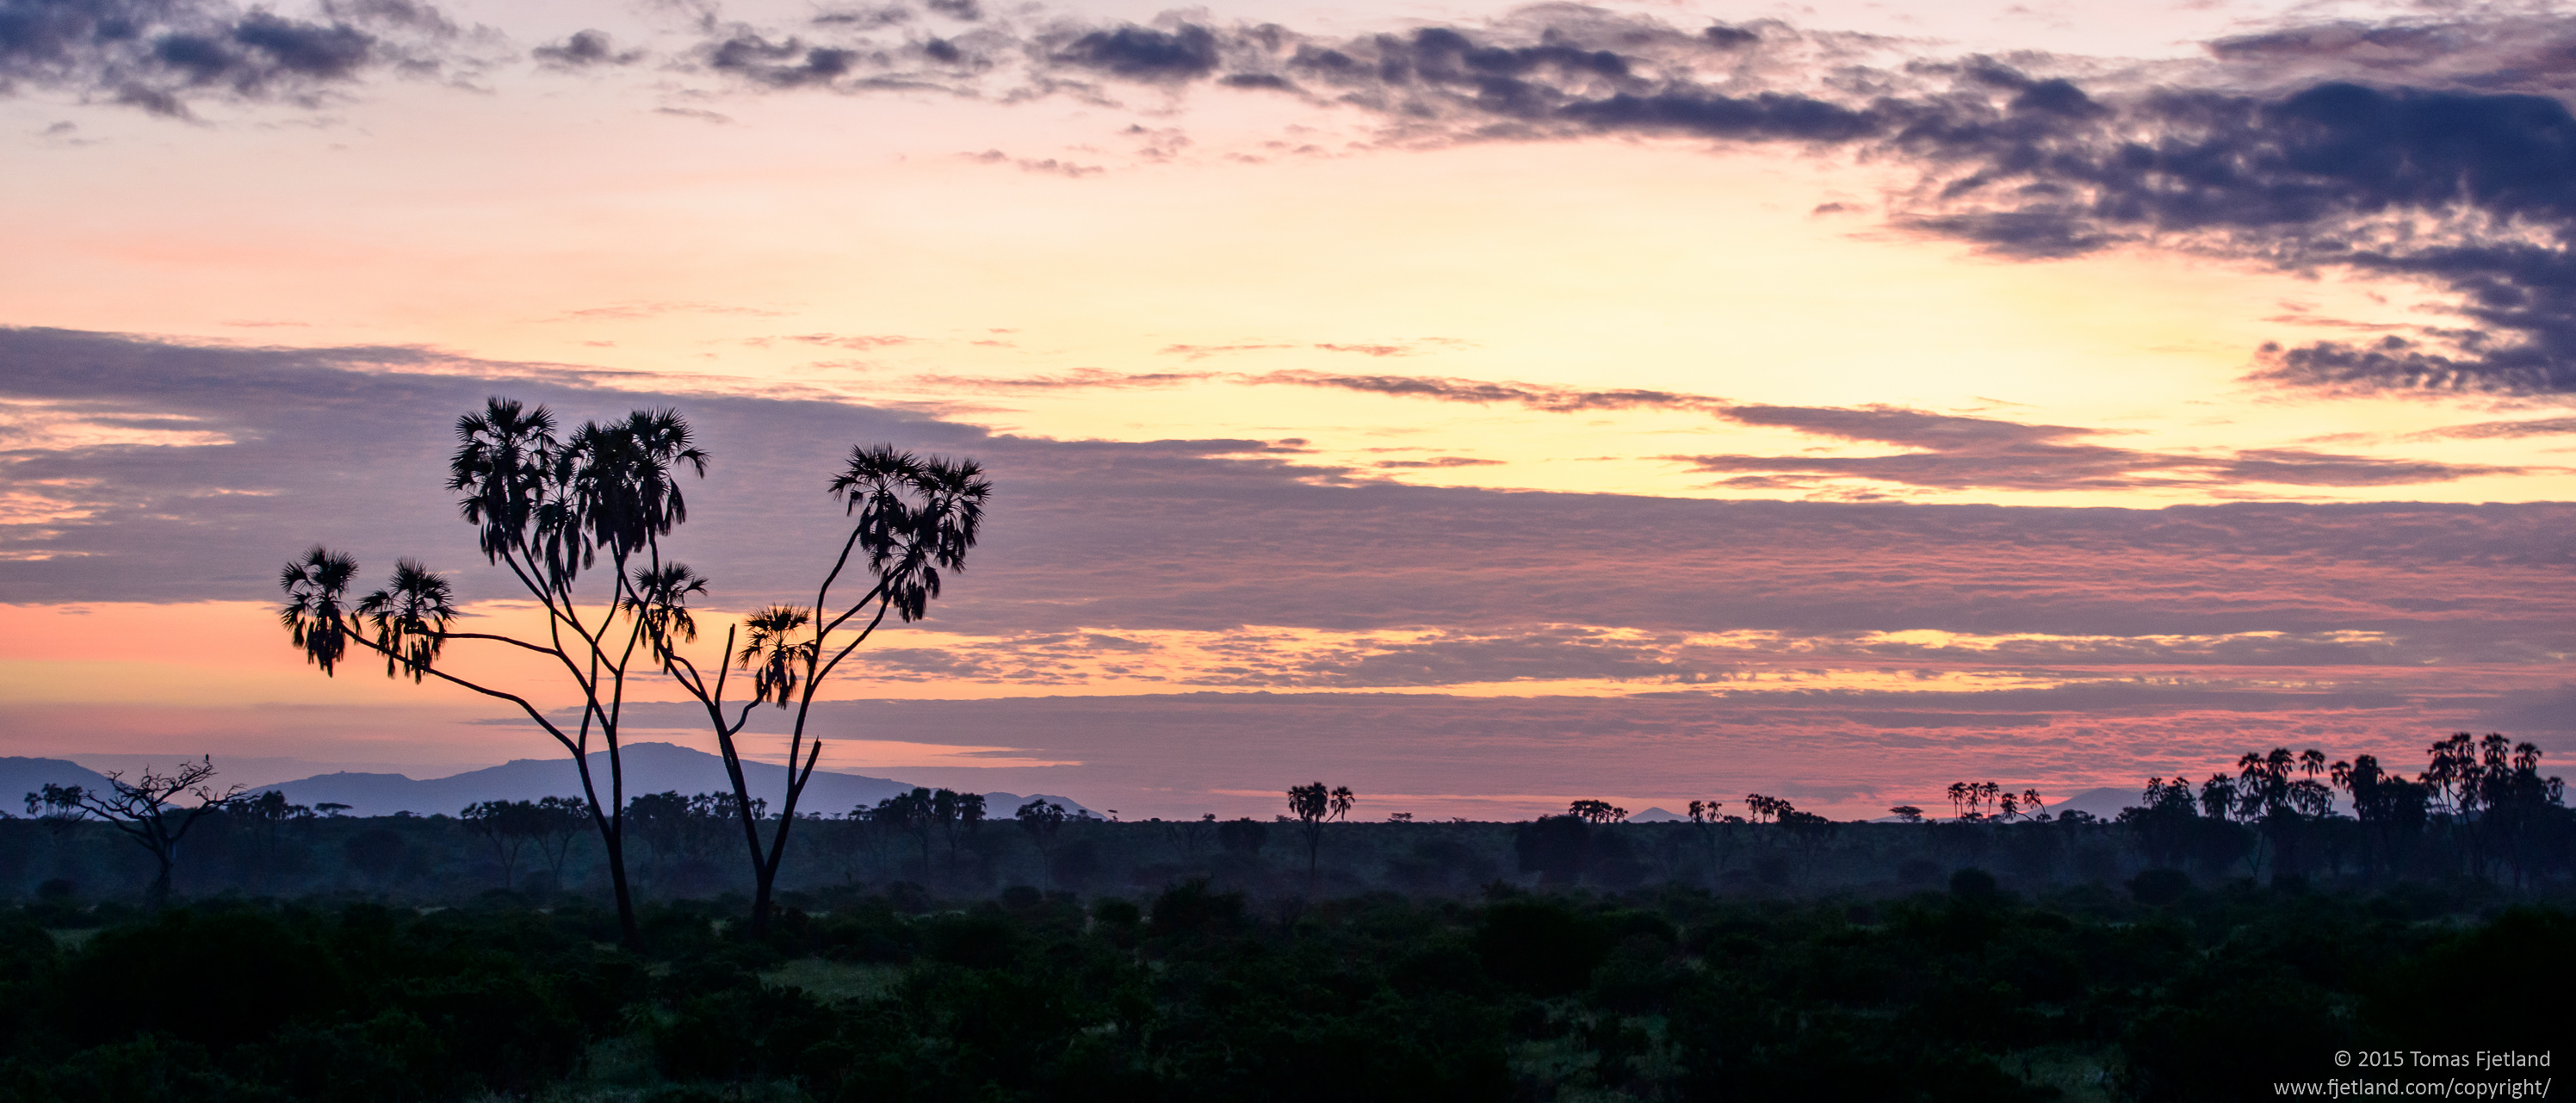 Clouds clearing as the sun rises over Samburu. The characteristic Doum palm in the foreground.